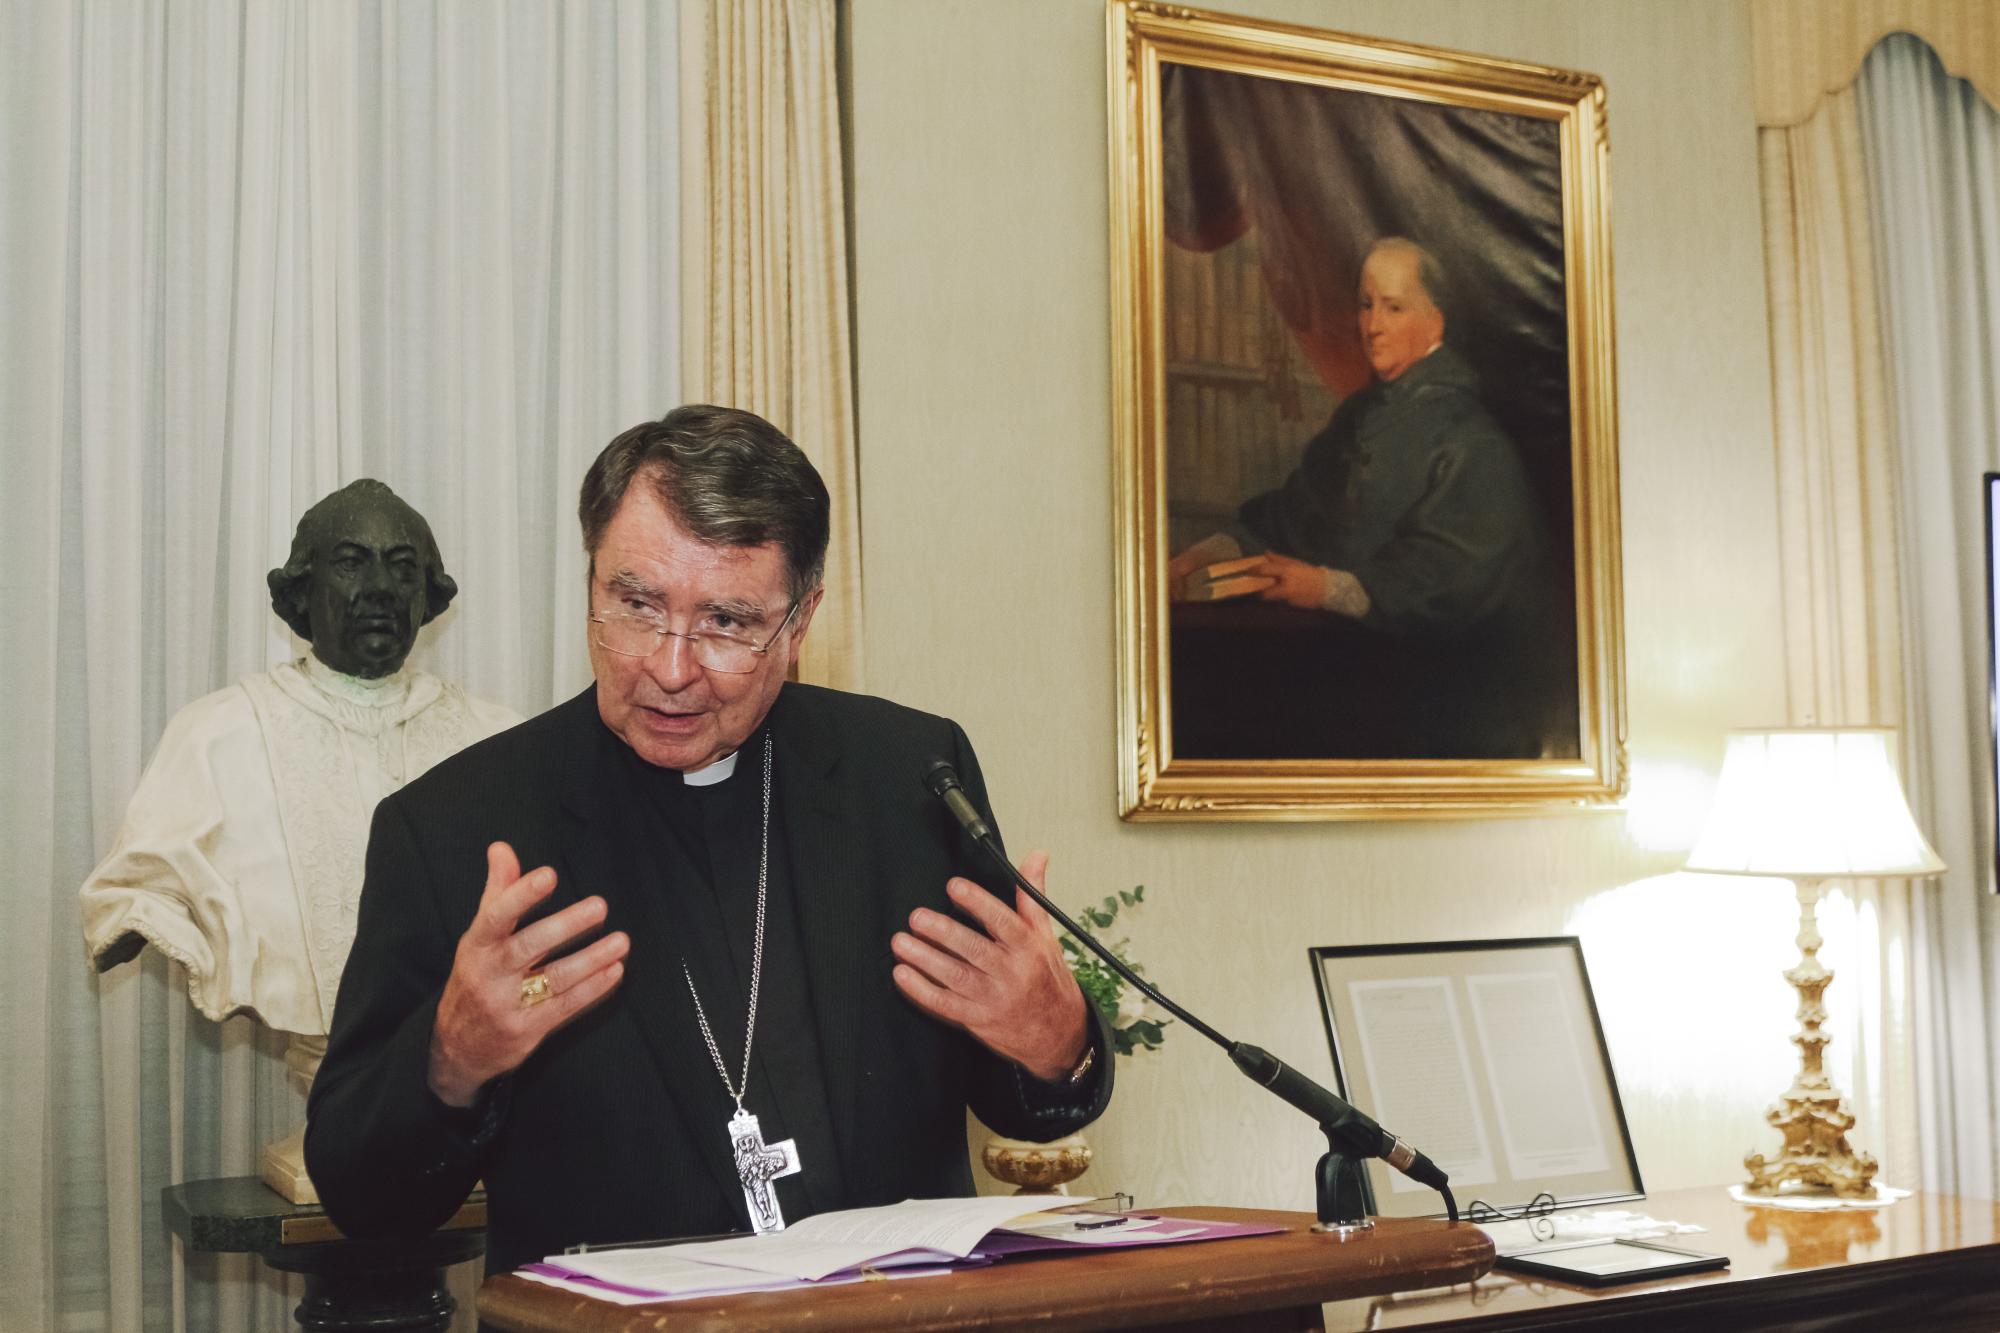 Archbishop Christophe Pierre welcomes guests to the Apostolic Nunciature